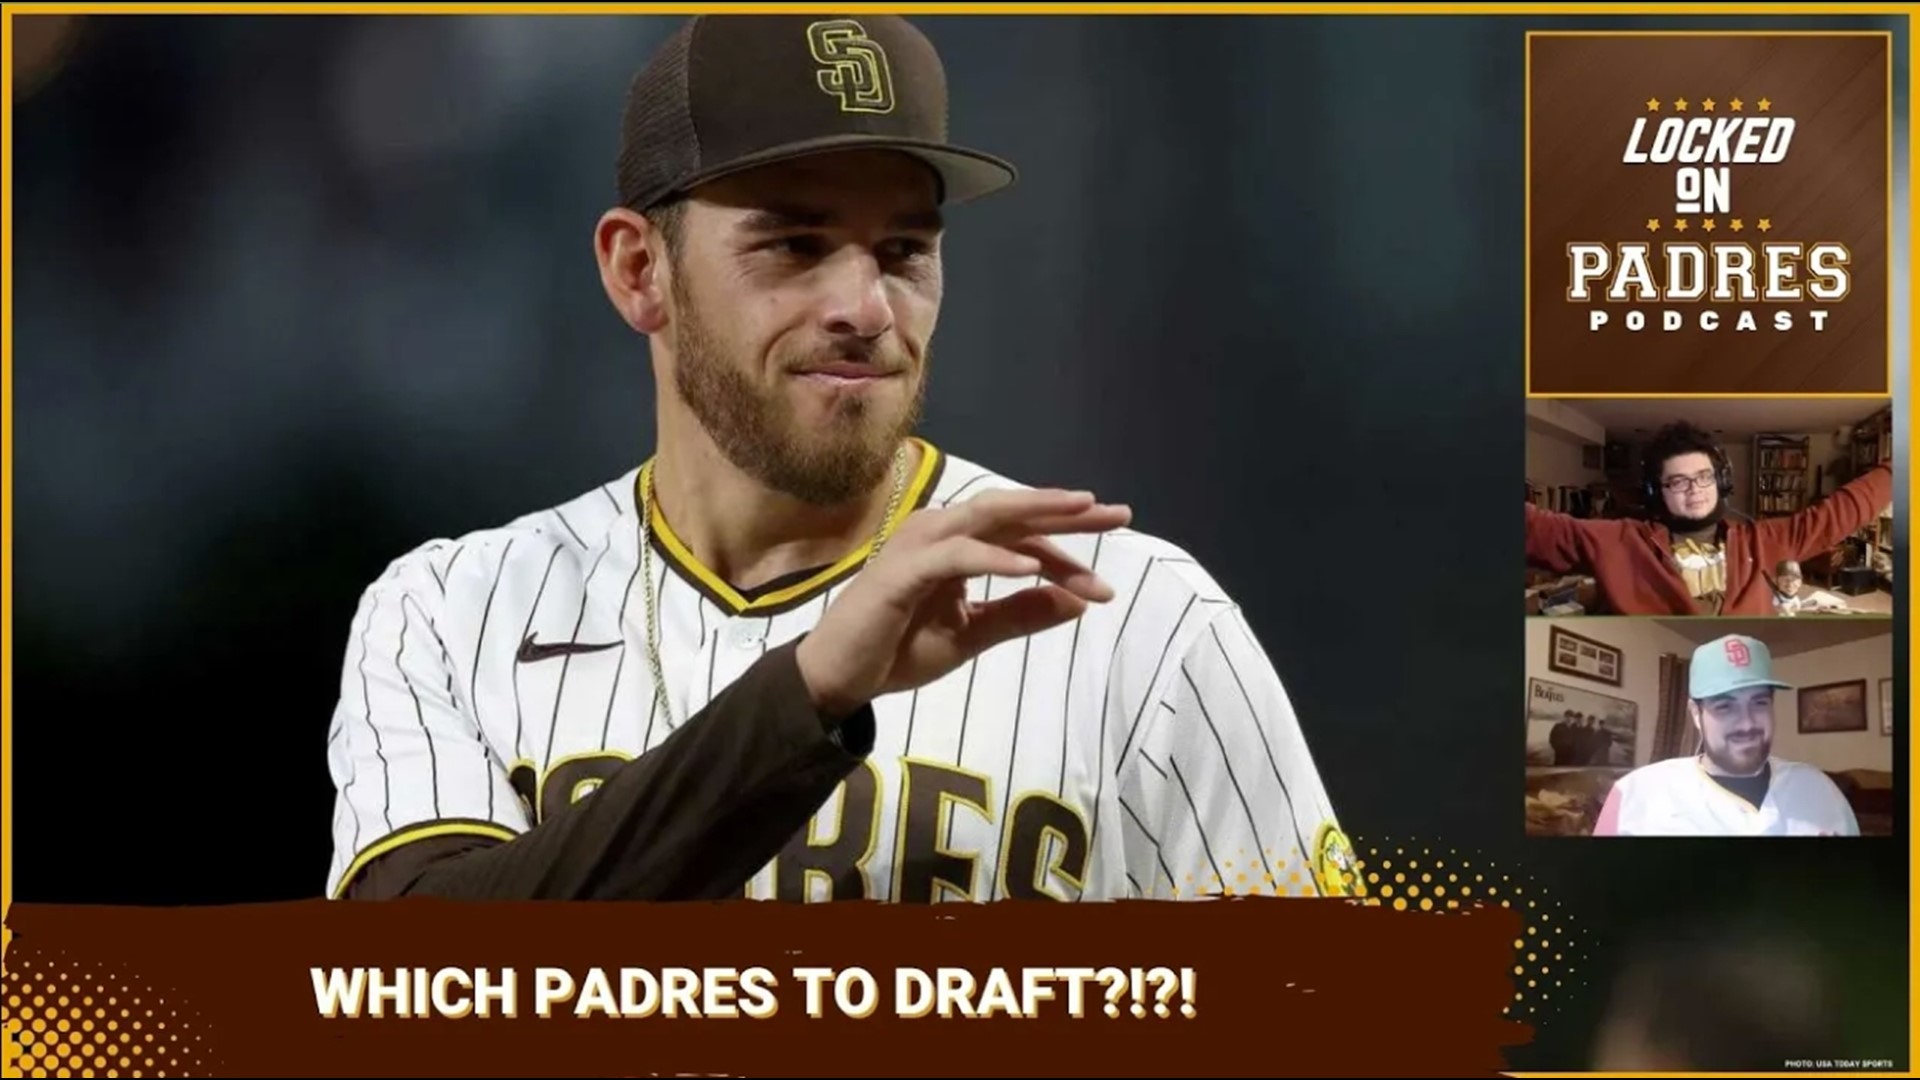 It's that time of the year folks: fantasy baseball time! On today's episode, Javier is joined by Dominick Martino and Matt Ahne to talk Padres